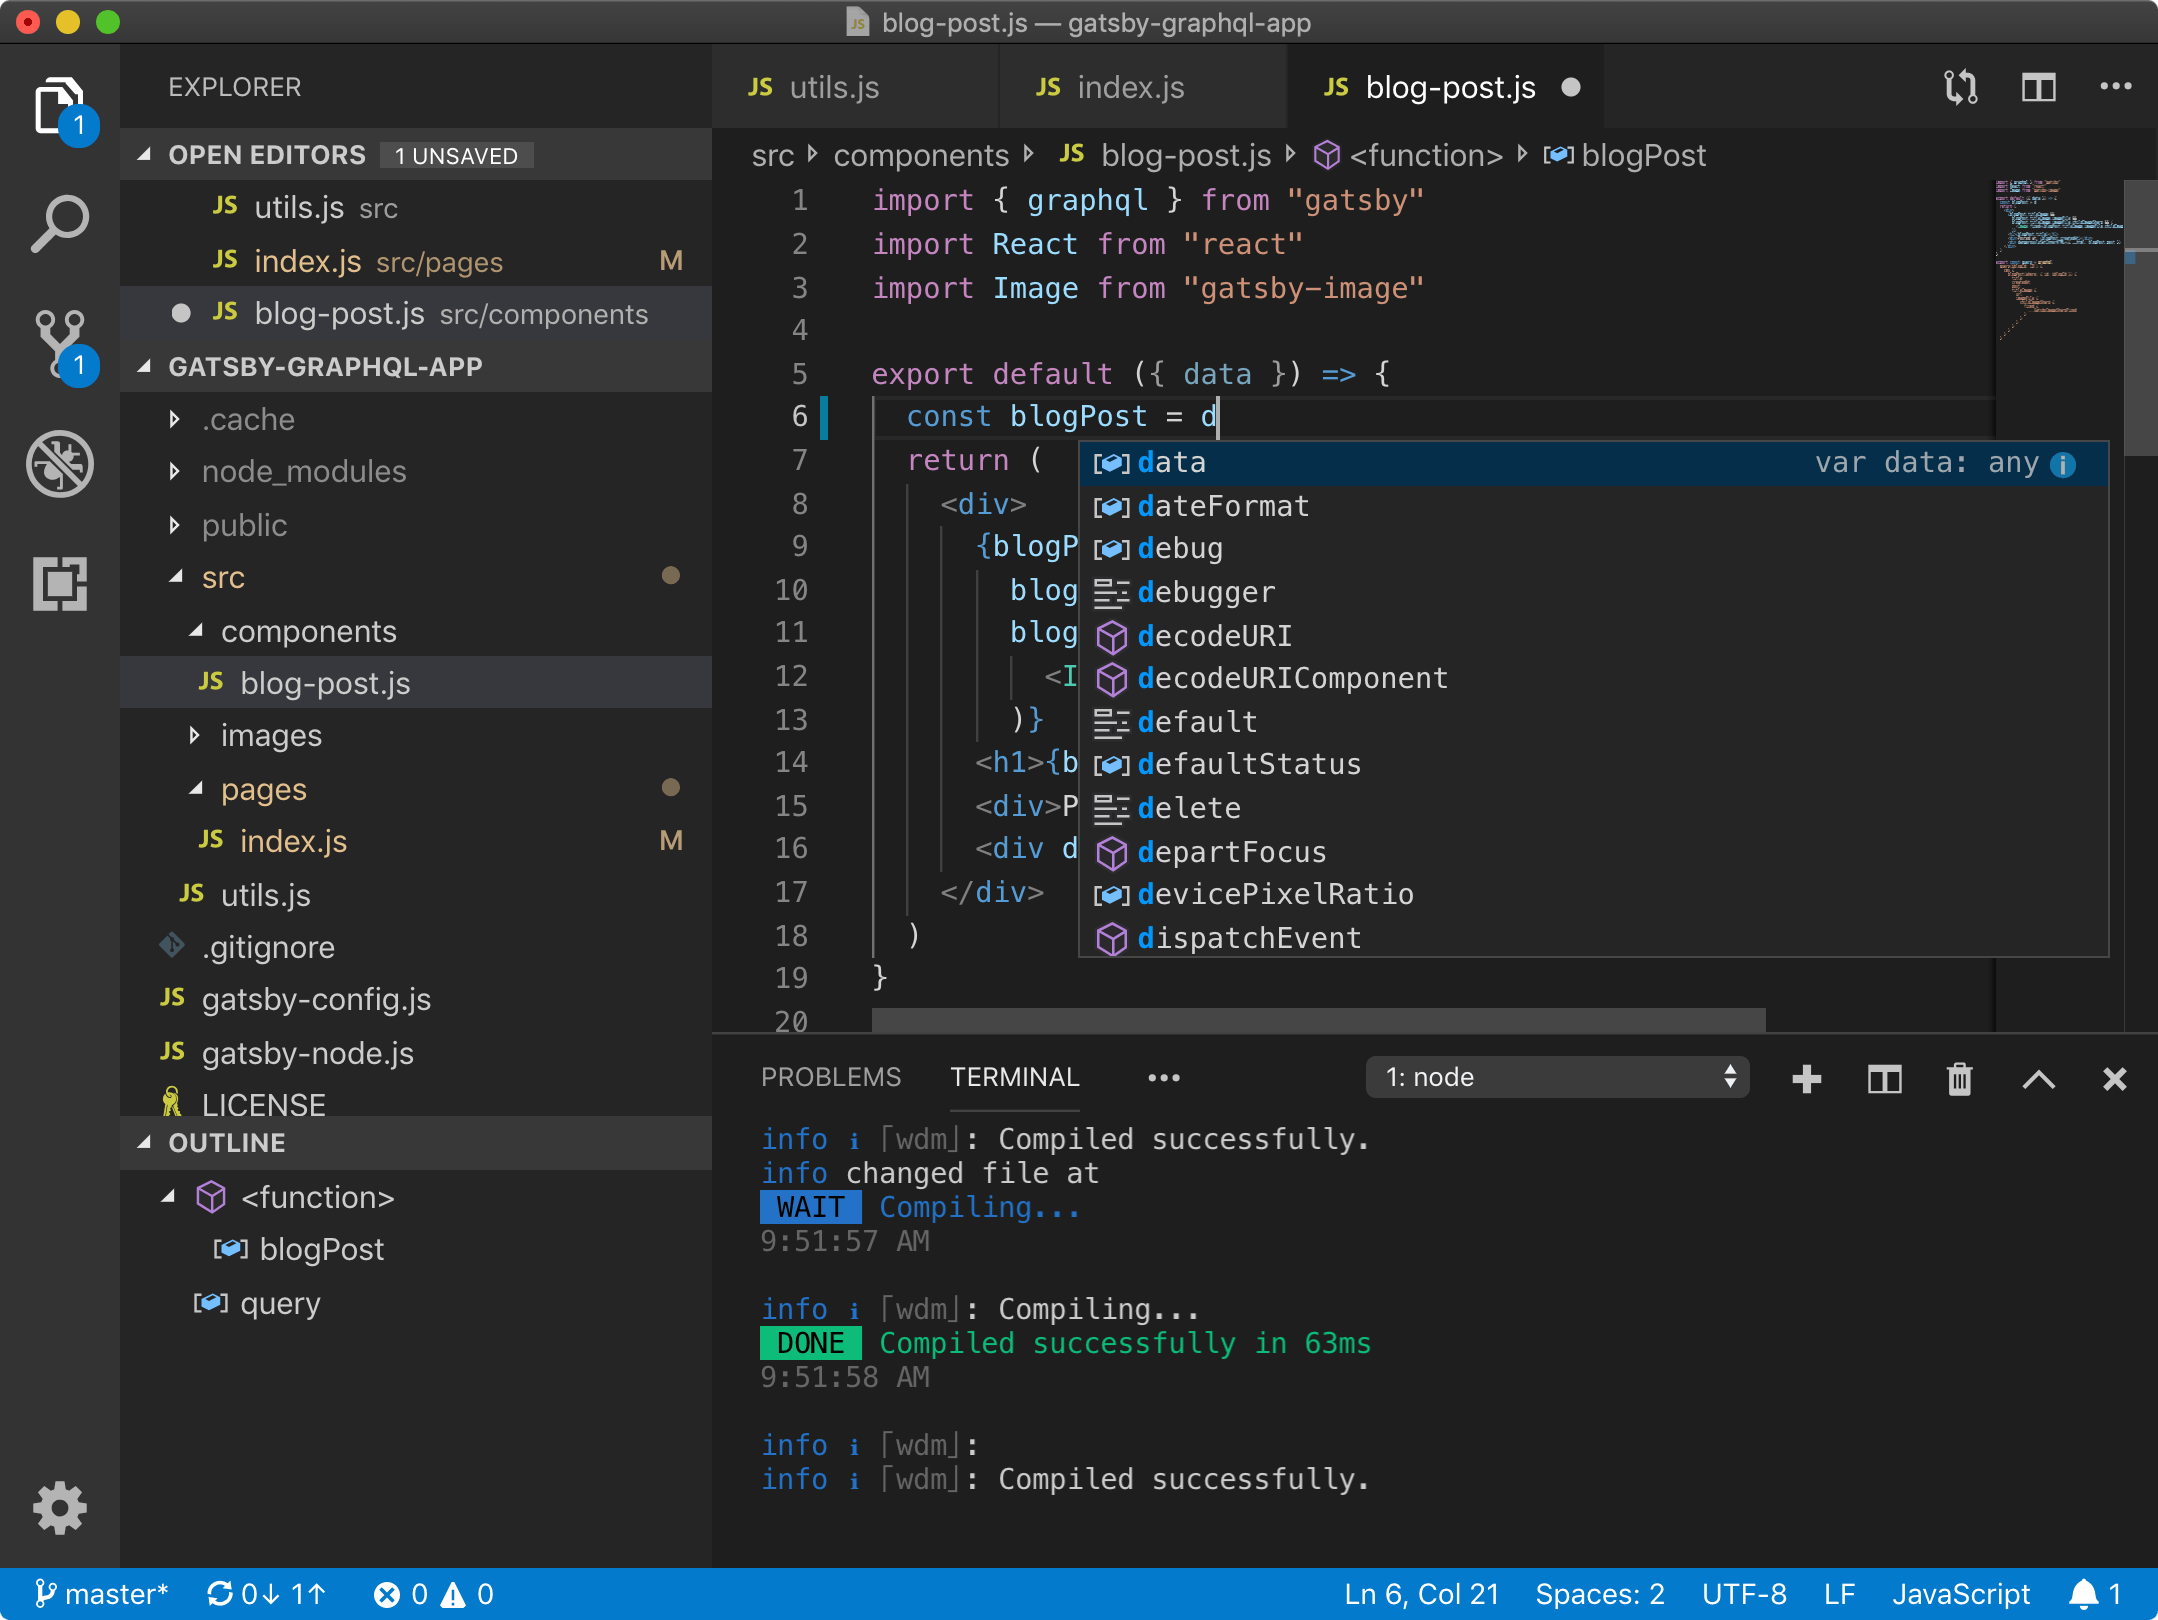 Visual Code Studio another text editor for Linux - Image from code.visualstudio.com